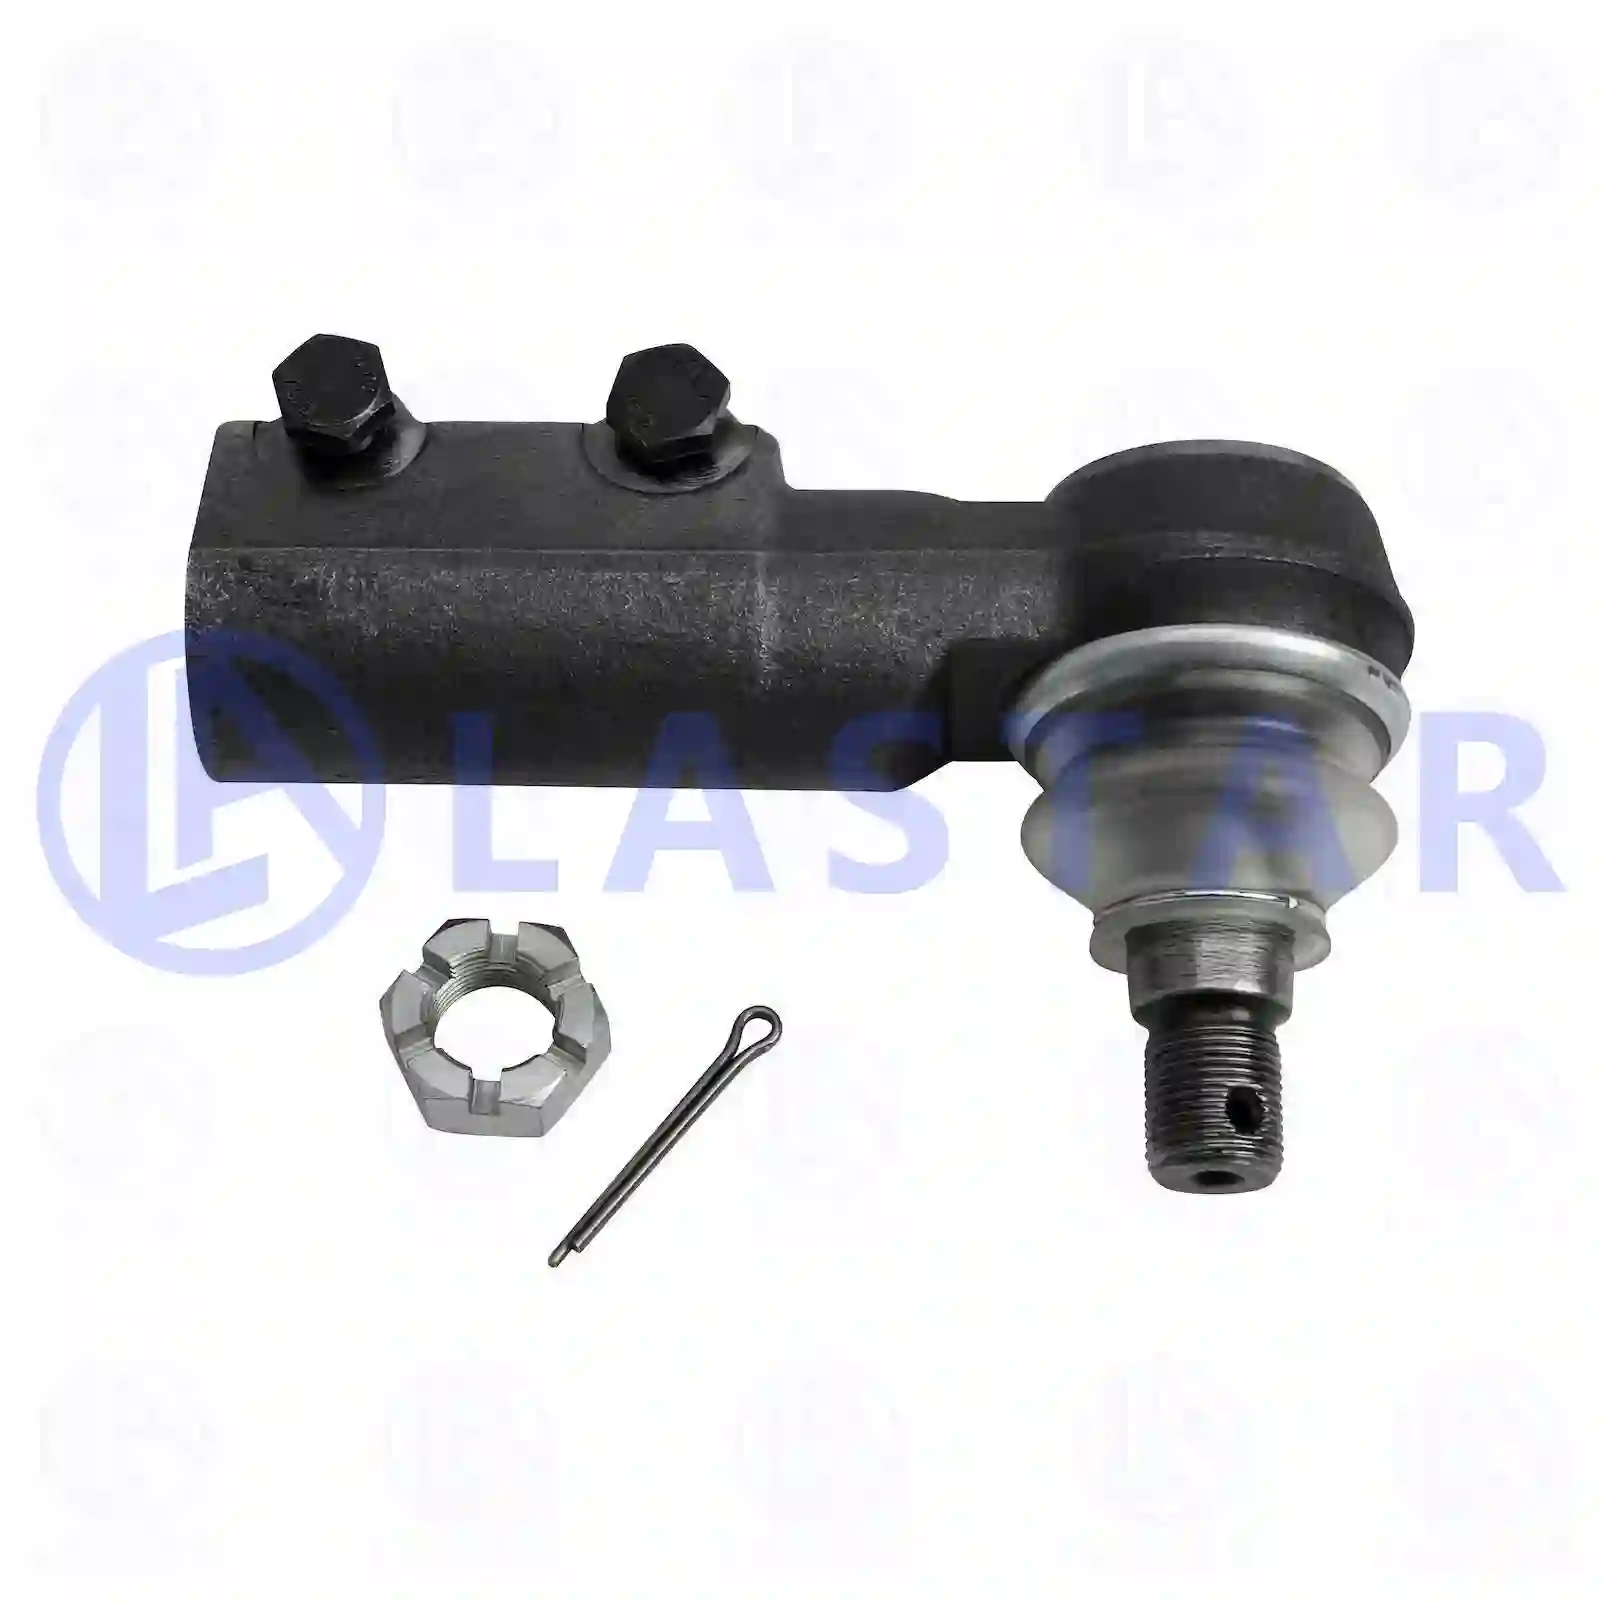 Ball joint, left hand thread, 77705365, 0003301935, 0003302935, 0003304135, 0003307835, 0003385029, 0013302235, 0013302735, 013302235, ZG40353-0008 ||  77705365 Lastar Spare Part | Truck Spare Parts, Auotomotive Spare Parts Ball joint, left hand thread, 77705365, 0003301935, 0003302935, 0003304135, 0003307835, 0003385029, 0013302235, 0013302735, 013302235, ZG40353-0008 ||  77705365 Lastar Spare Part | Truck Spare Parts, Auotomotive Spare Parts